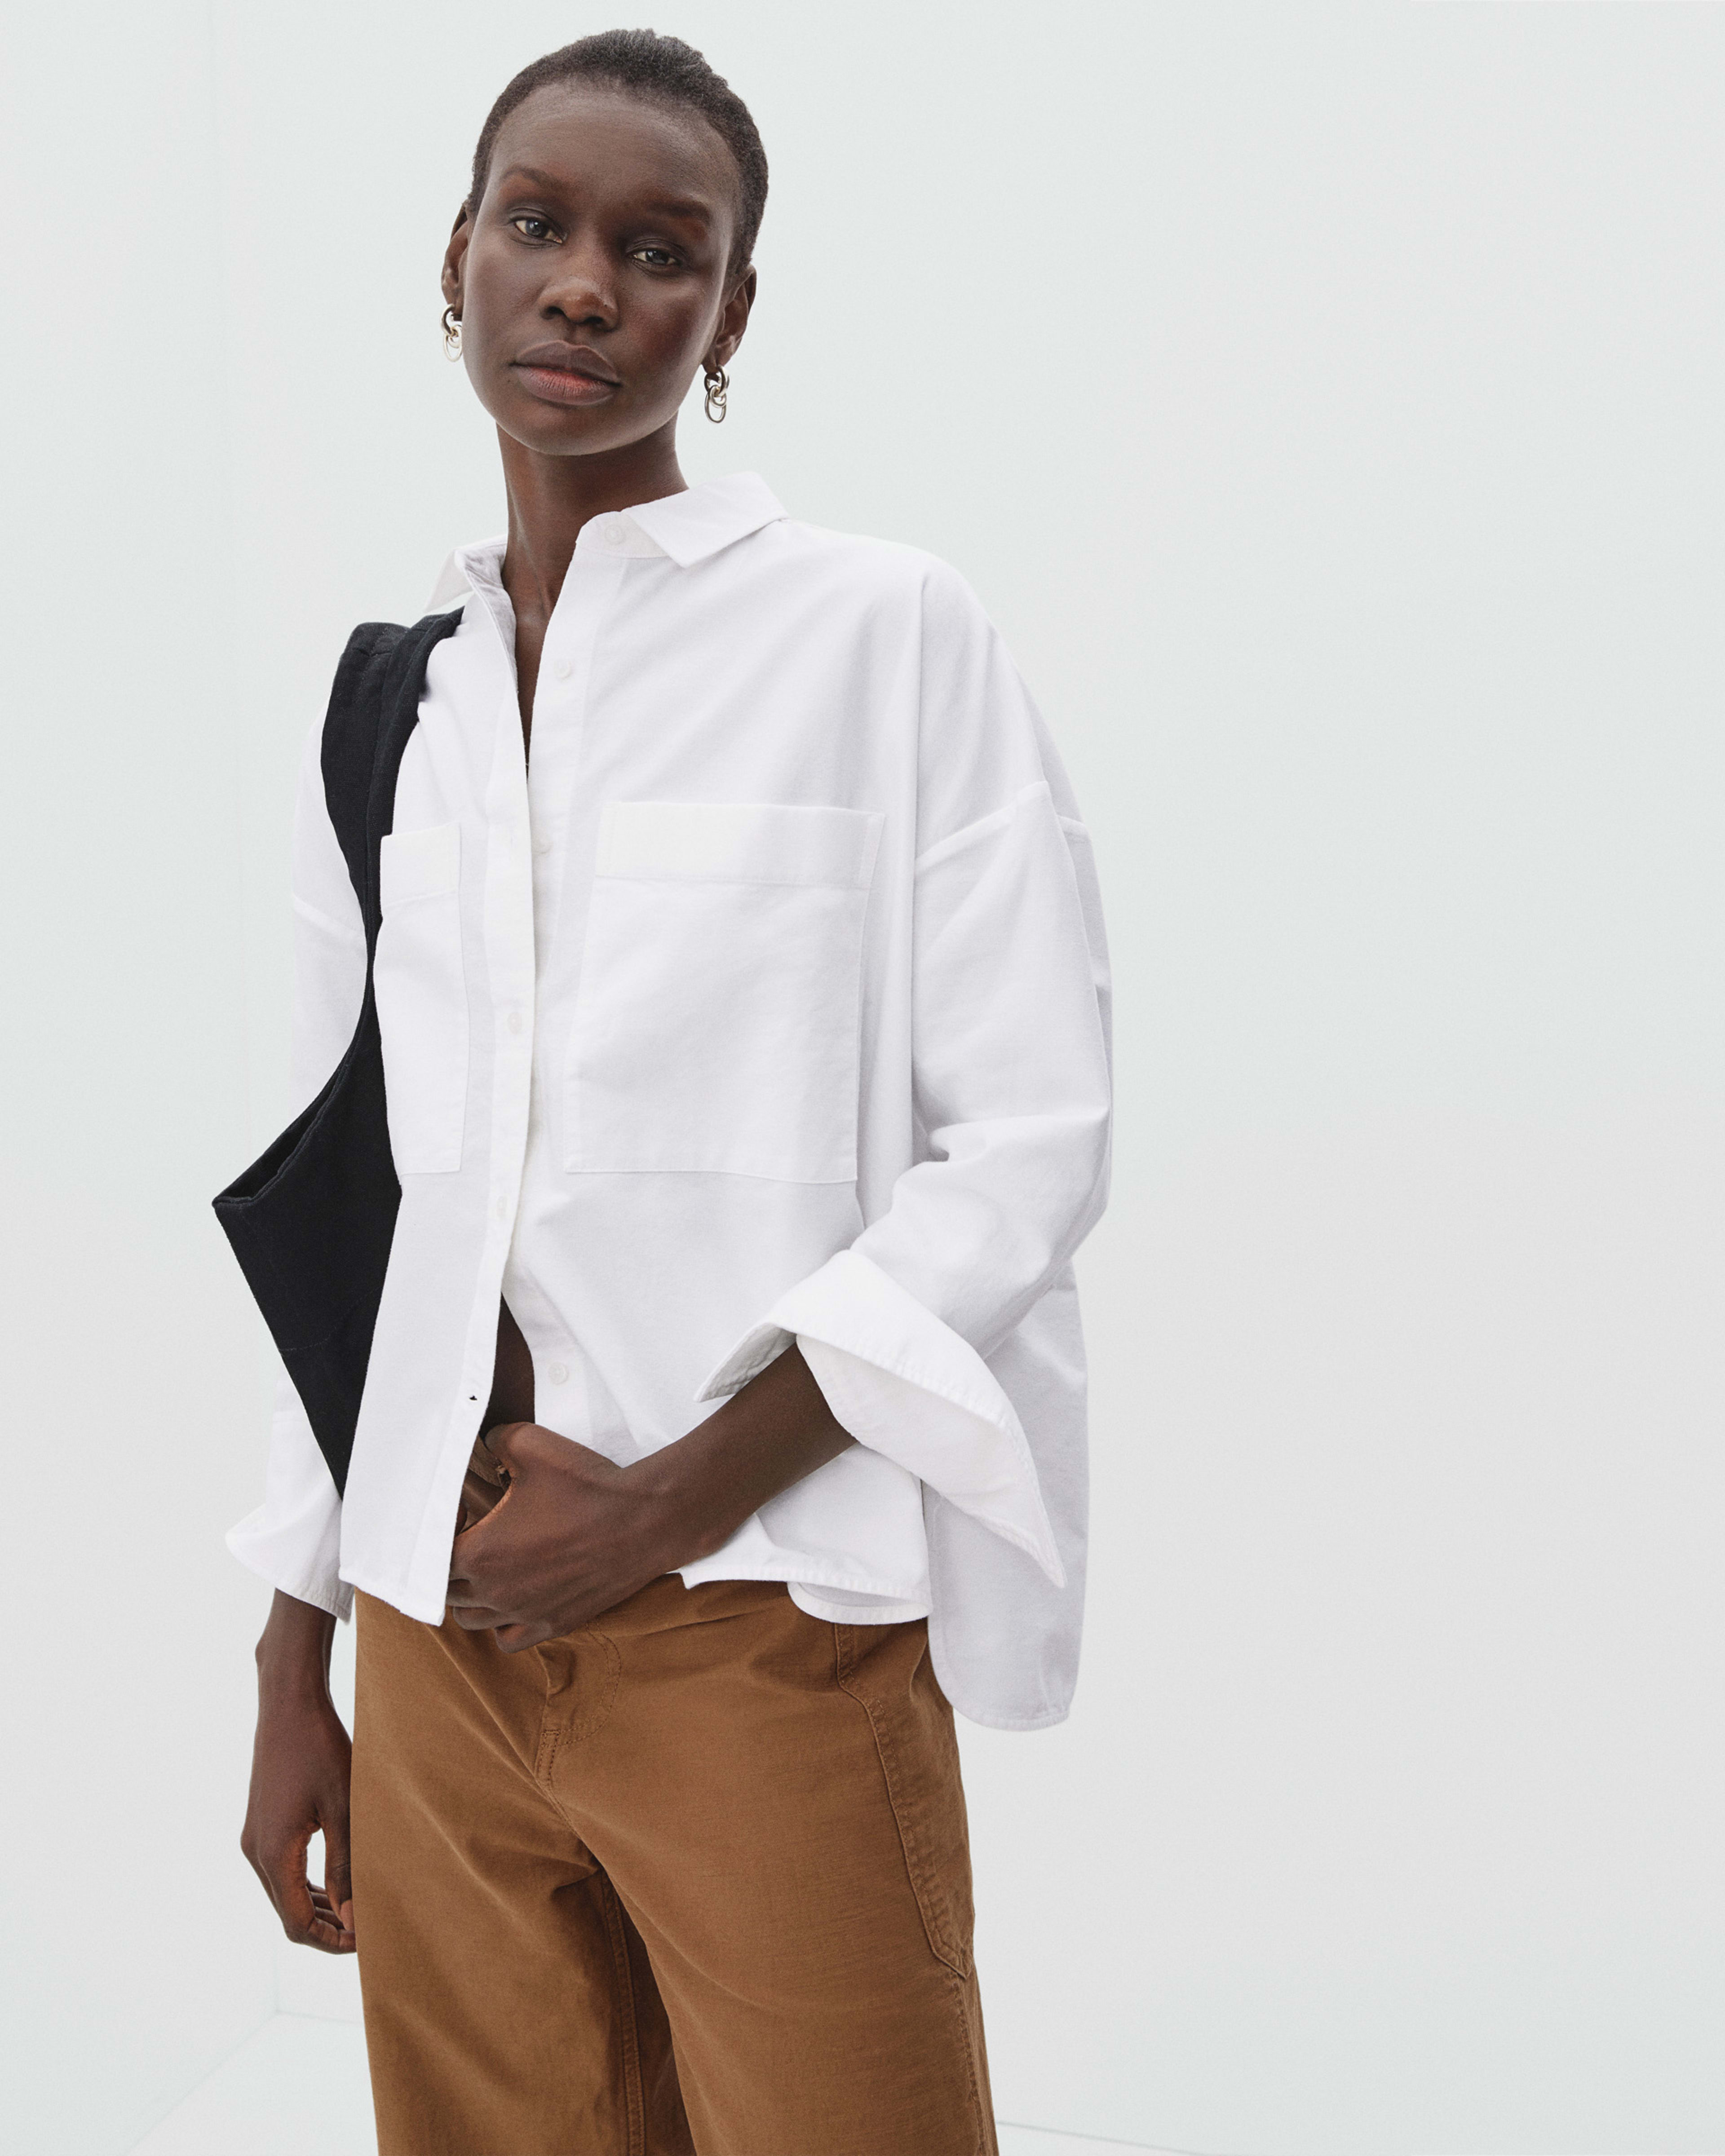 Everlane's ReNew Puffy Puff With a 38,000 Person Waitlist Is Back